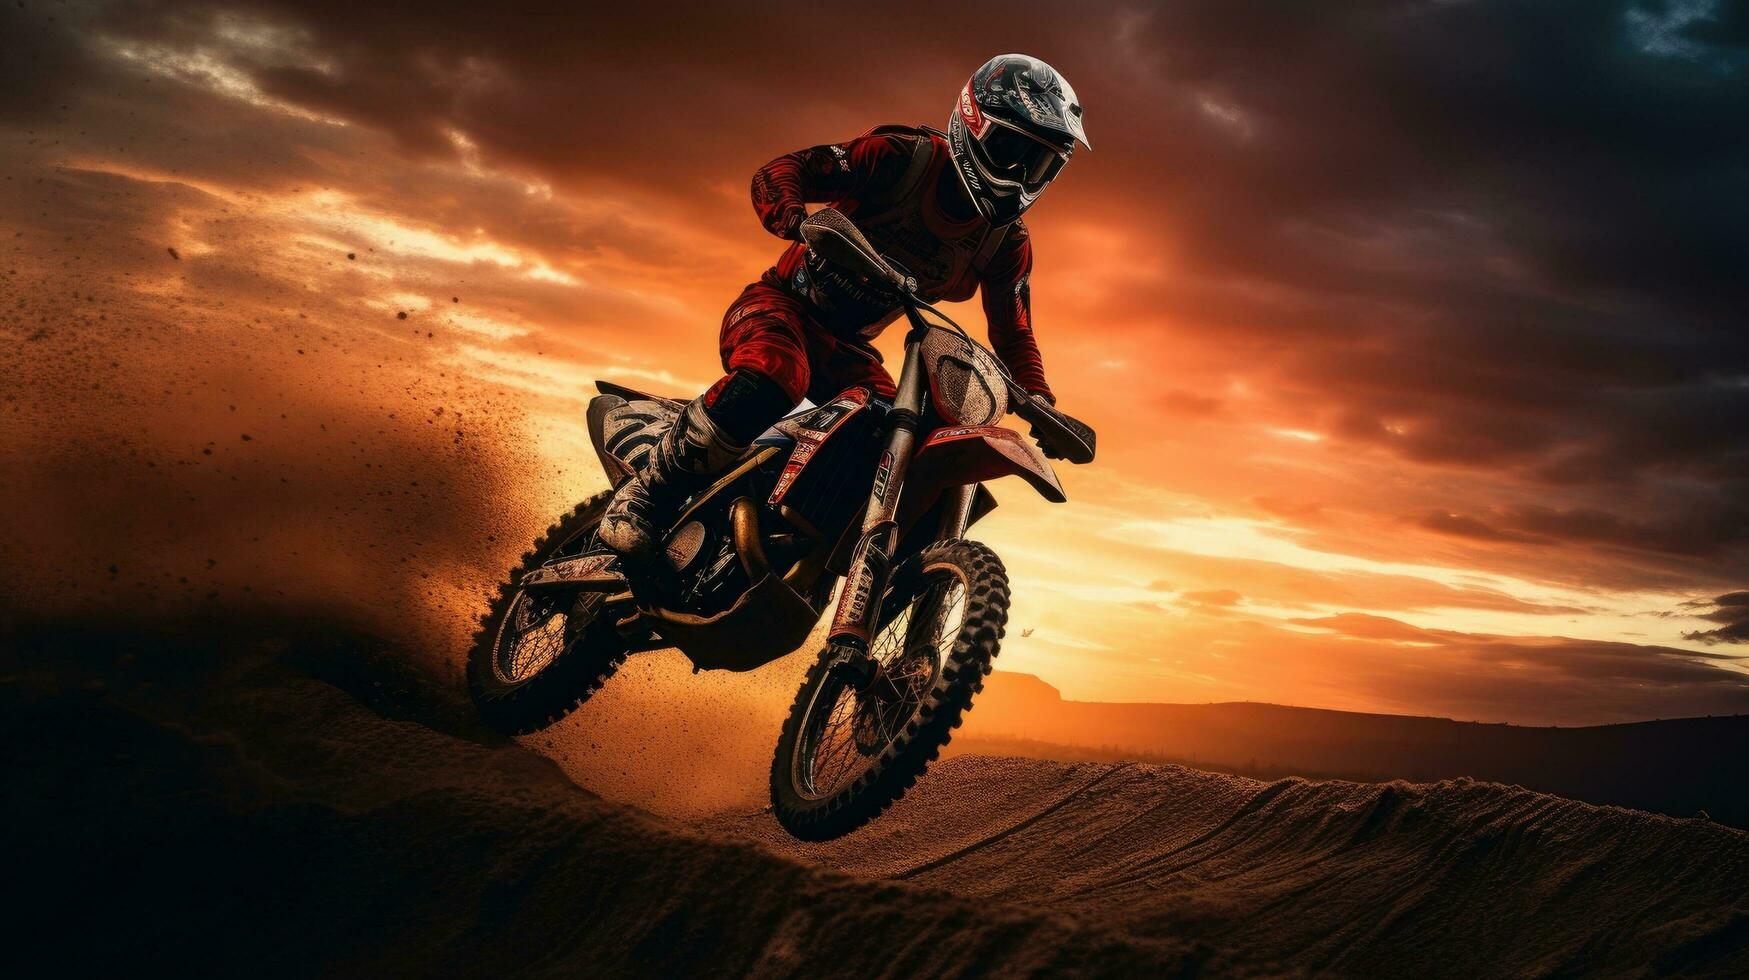 Motocross Stock Photos, Images and Backgrounds for Free Download